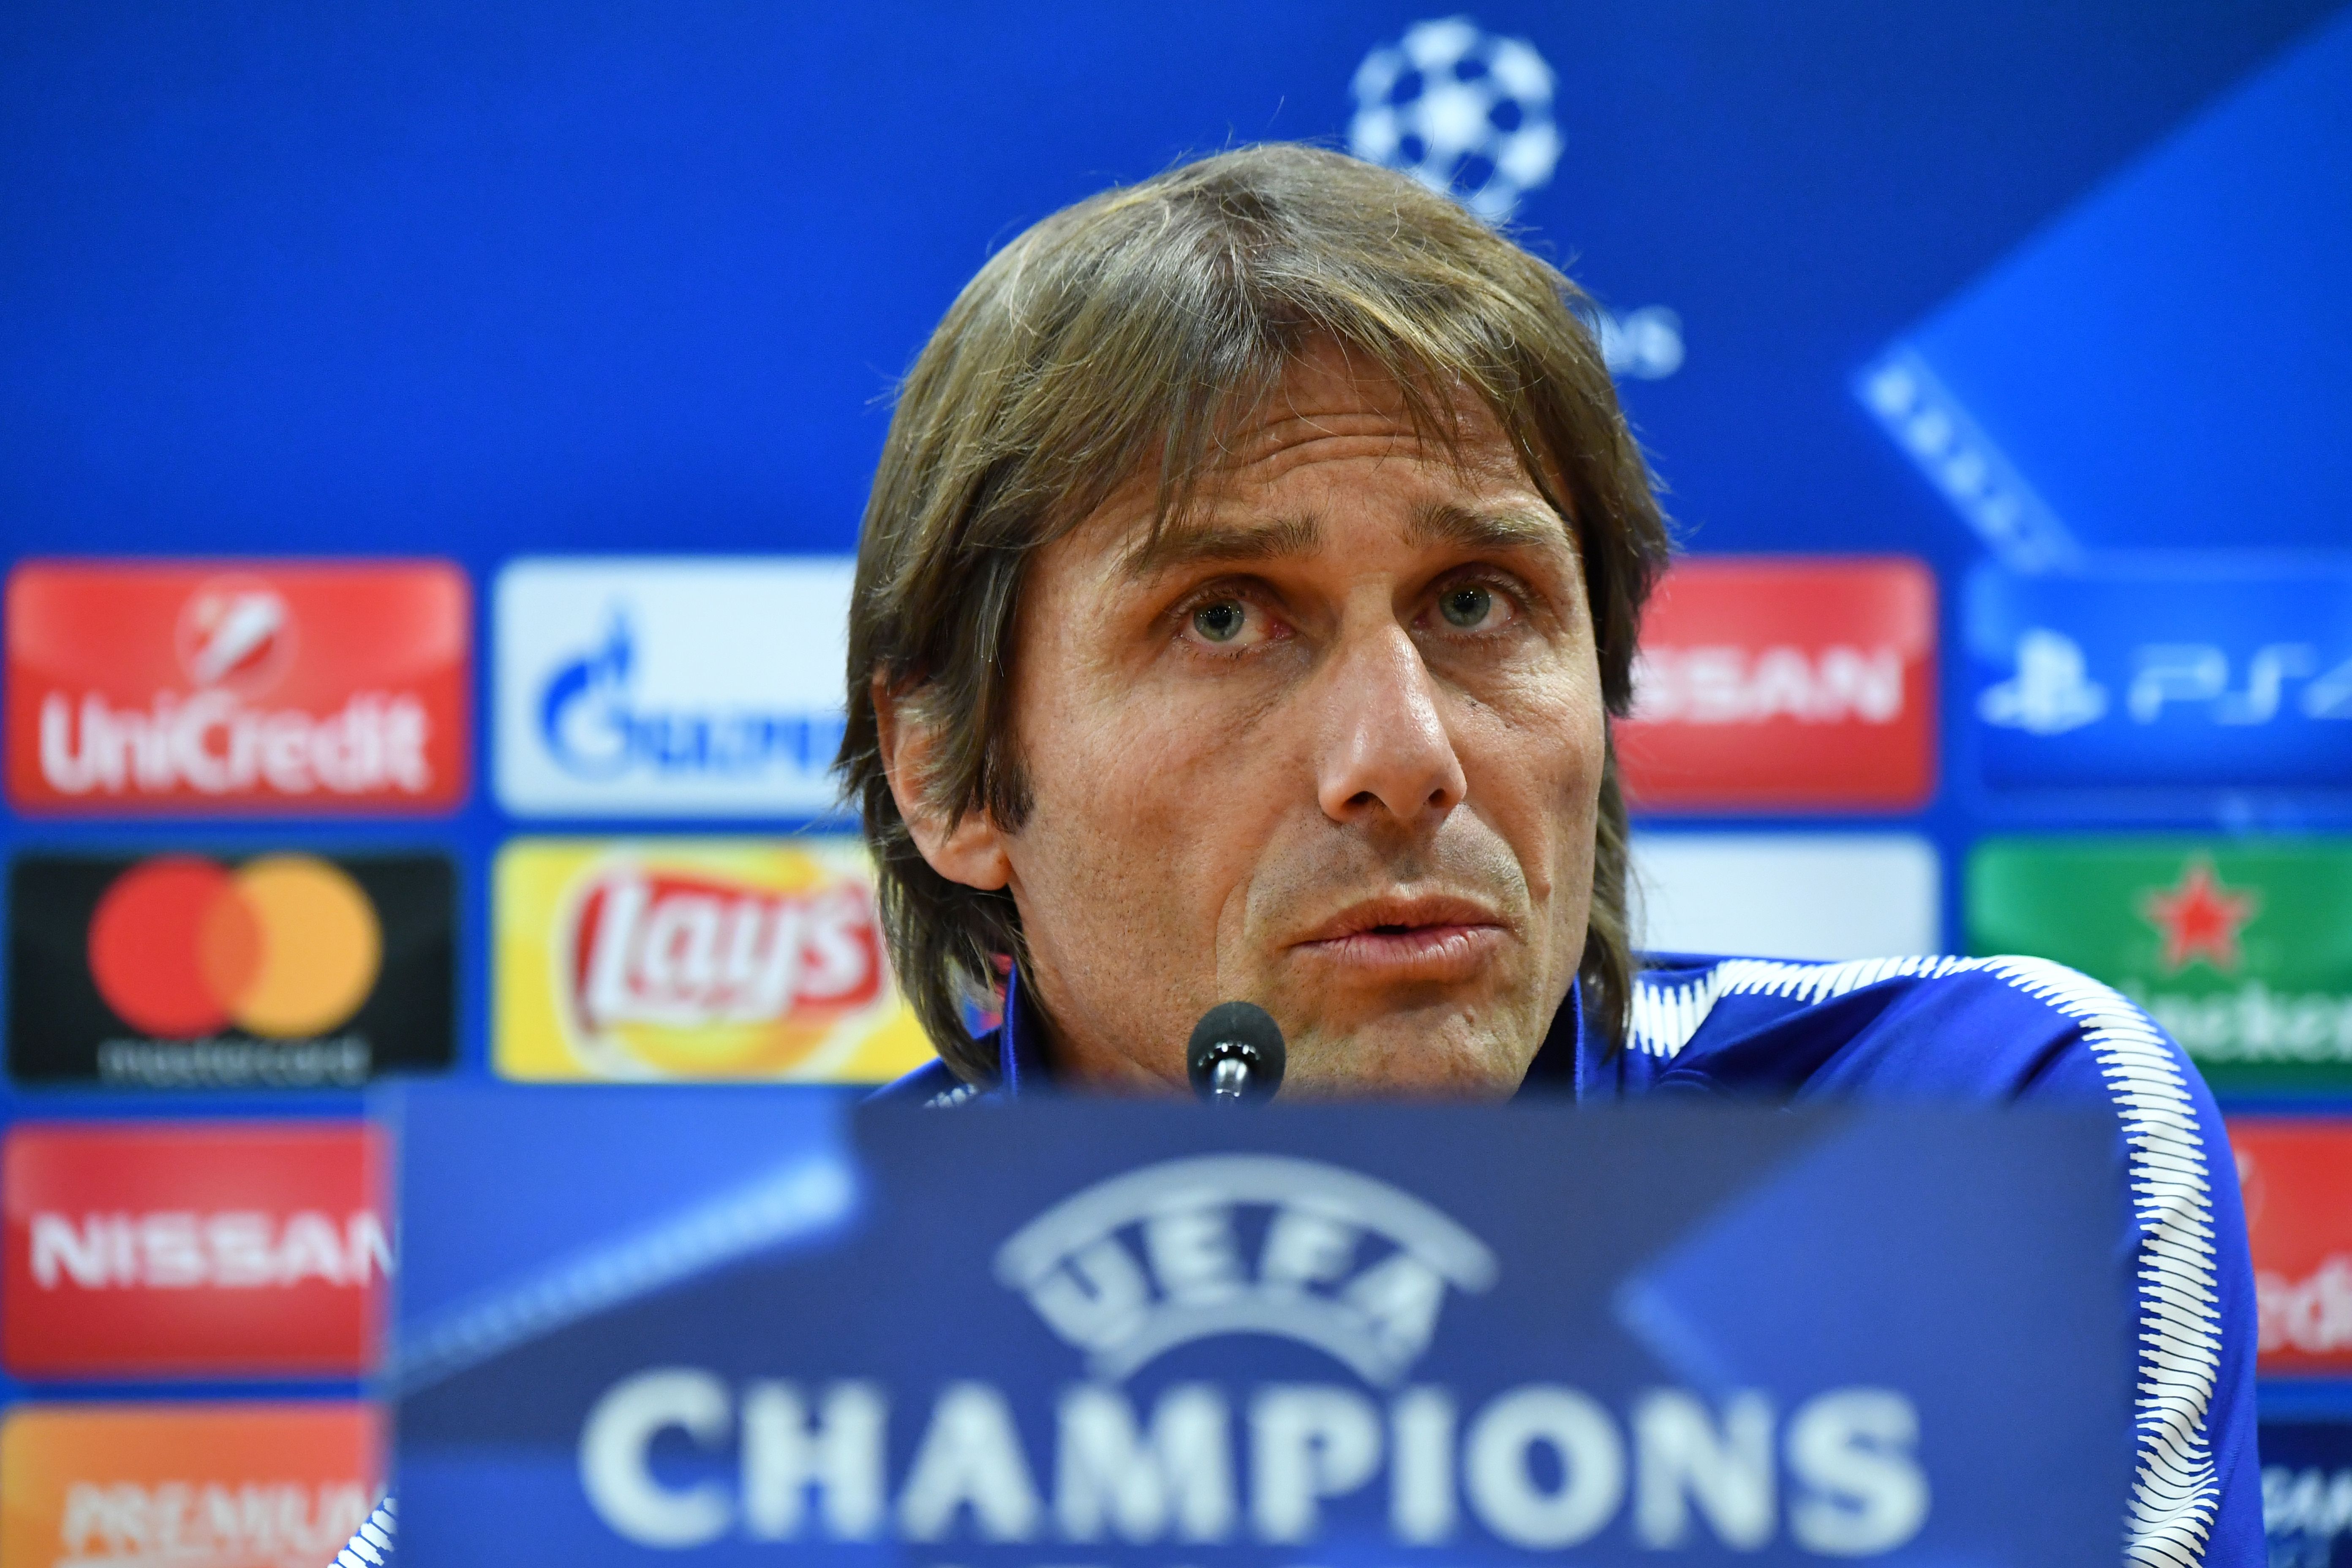 Chelsea's Italian head coach Antonio Conte attends a press conference on the eve of the UEFA Champions League football match AS Roma vs Chelsea, on October 30, 2017 at the Olympic stadium in Rome.  / AFP PHOTO / Alberto PIZZOLI        (Photo credit should read ALBERTO PIZZOLI/AFP/Getty Images)